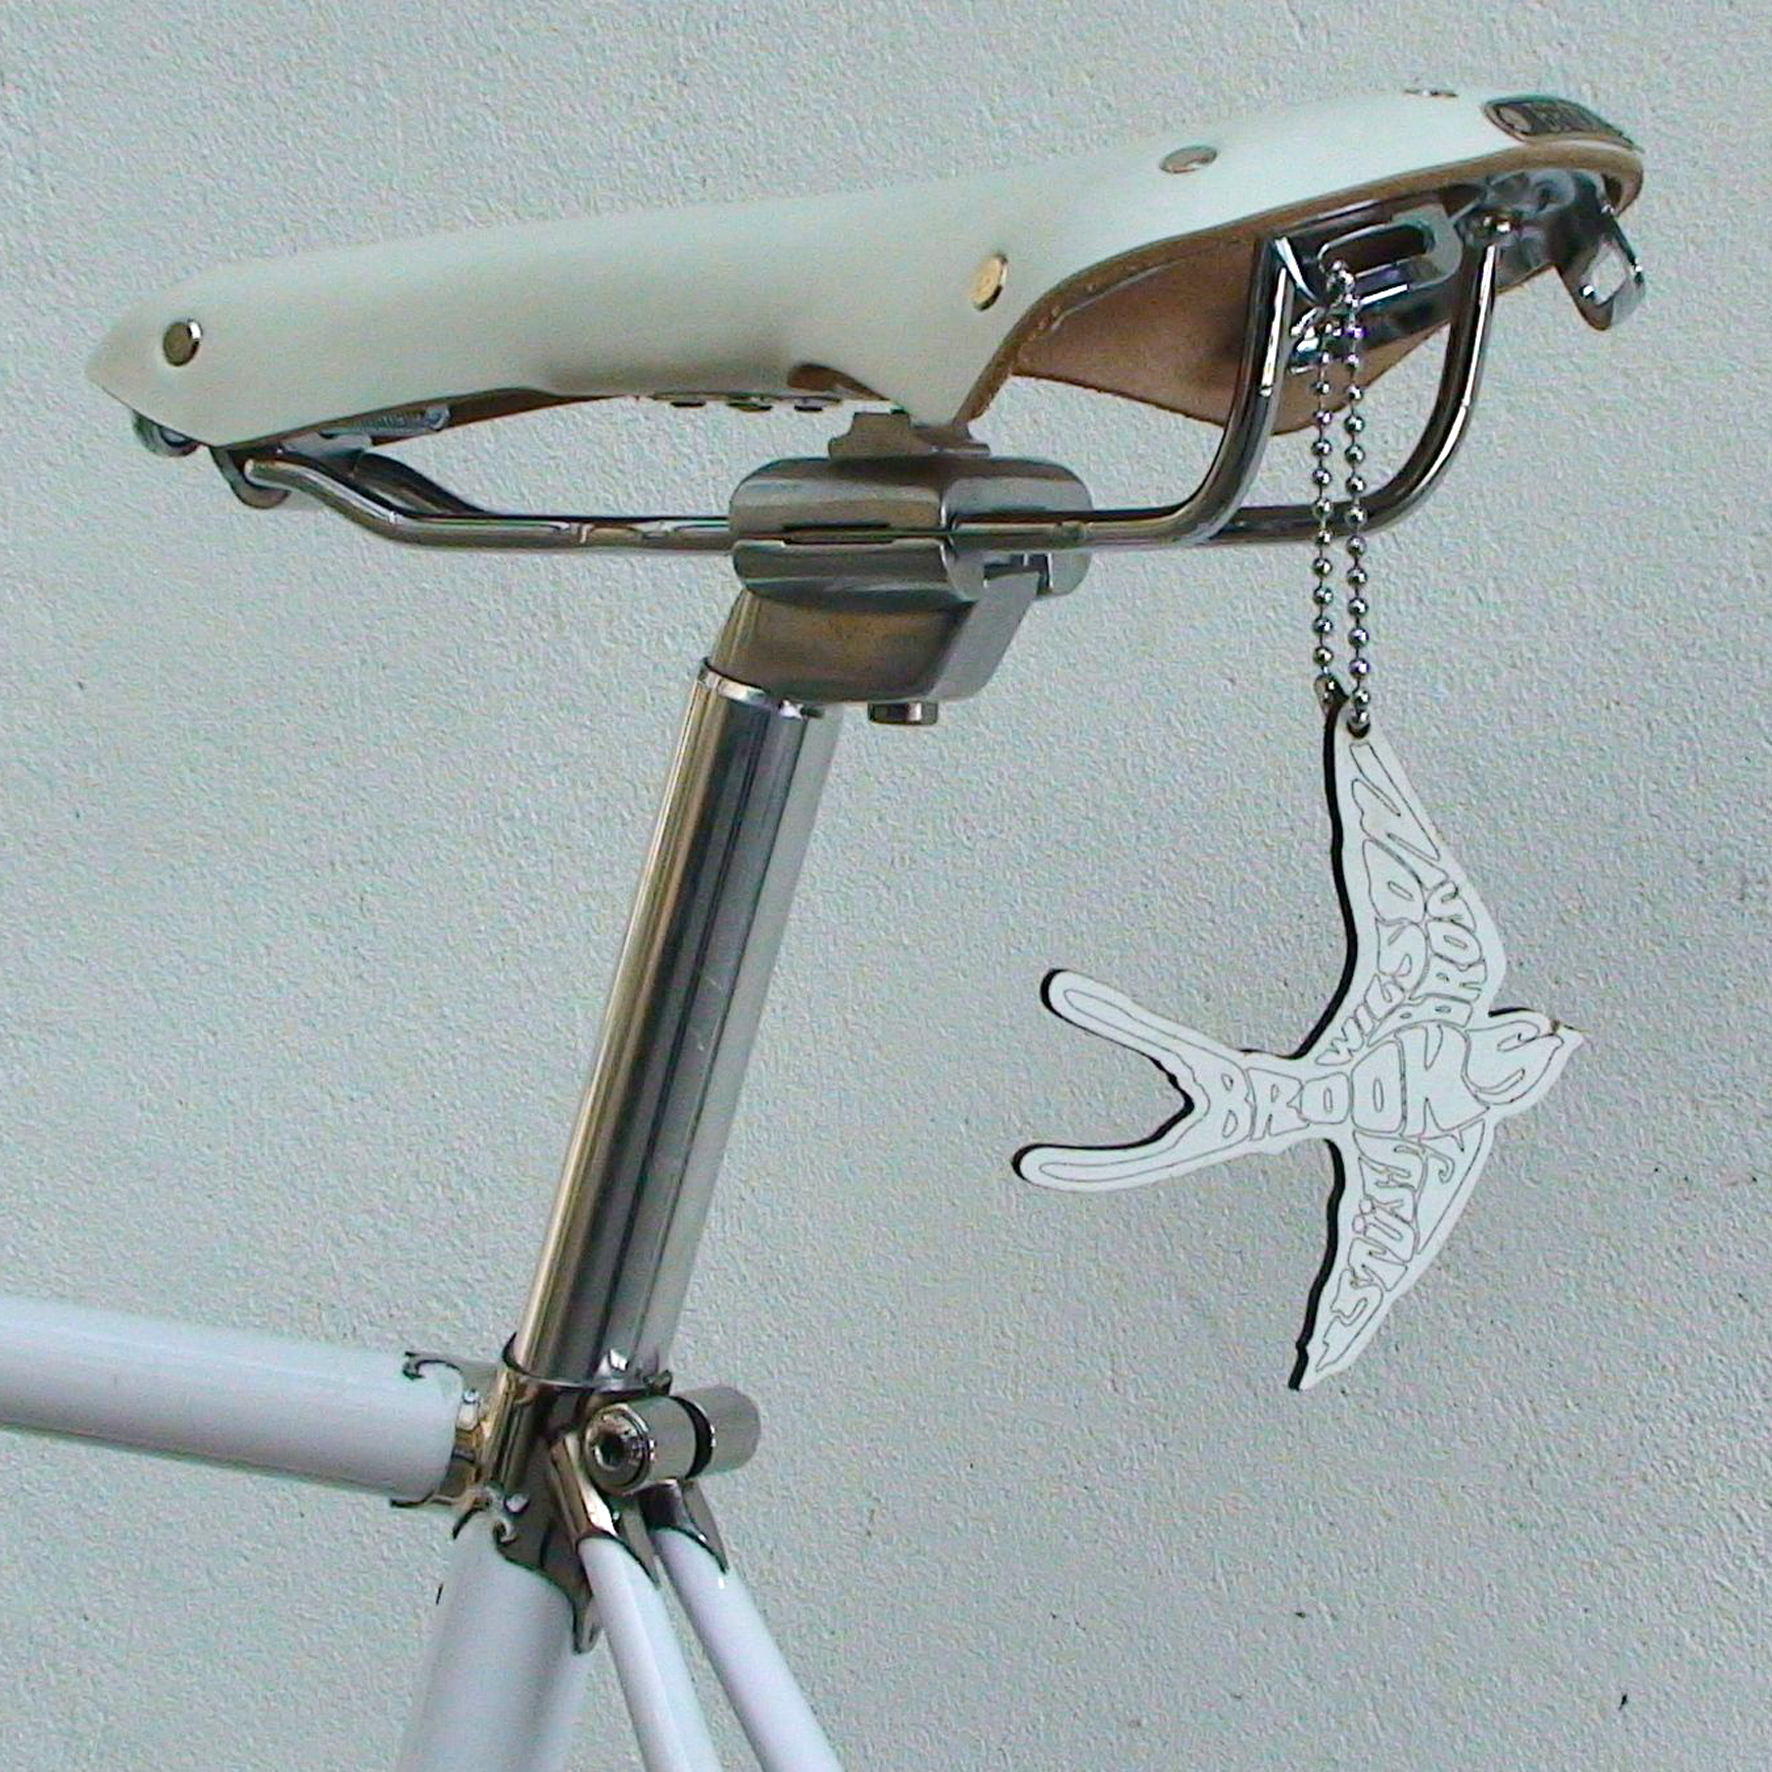 Brooks / StÃ¼ssy - The Lesser Spotted White Swallow on Nike bike